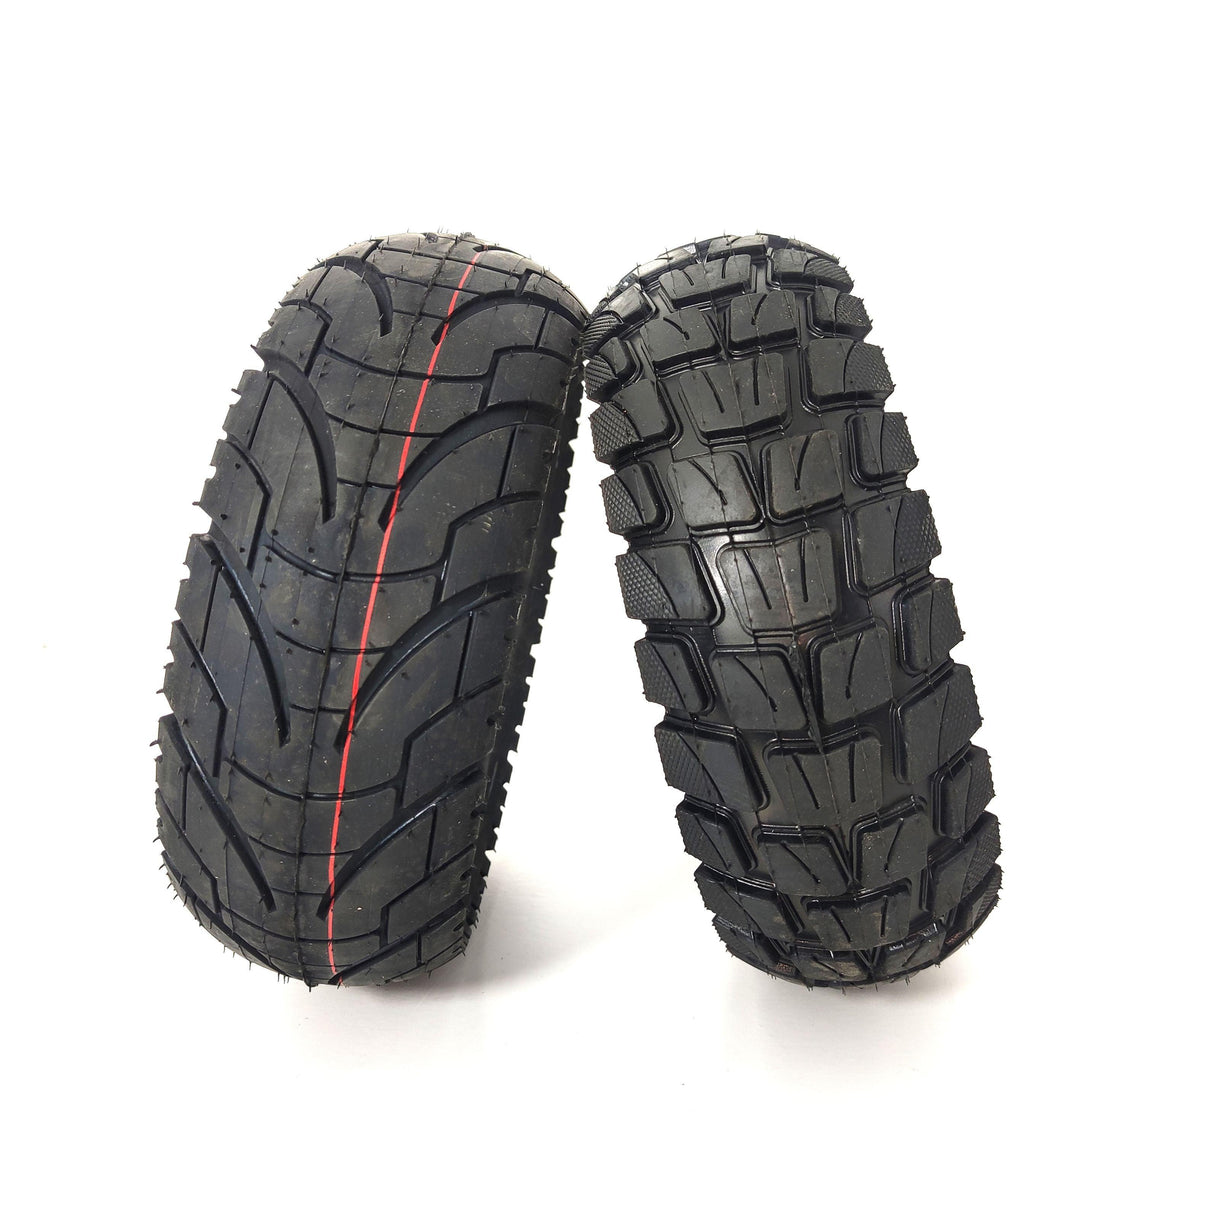 S-scooter road tire - TODIMART